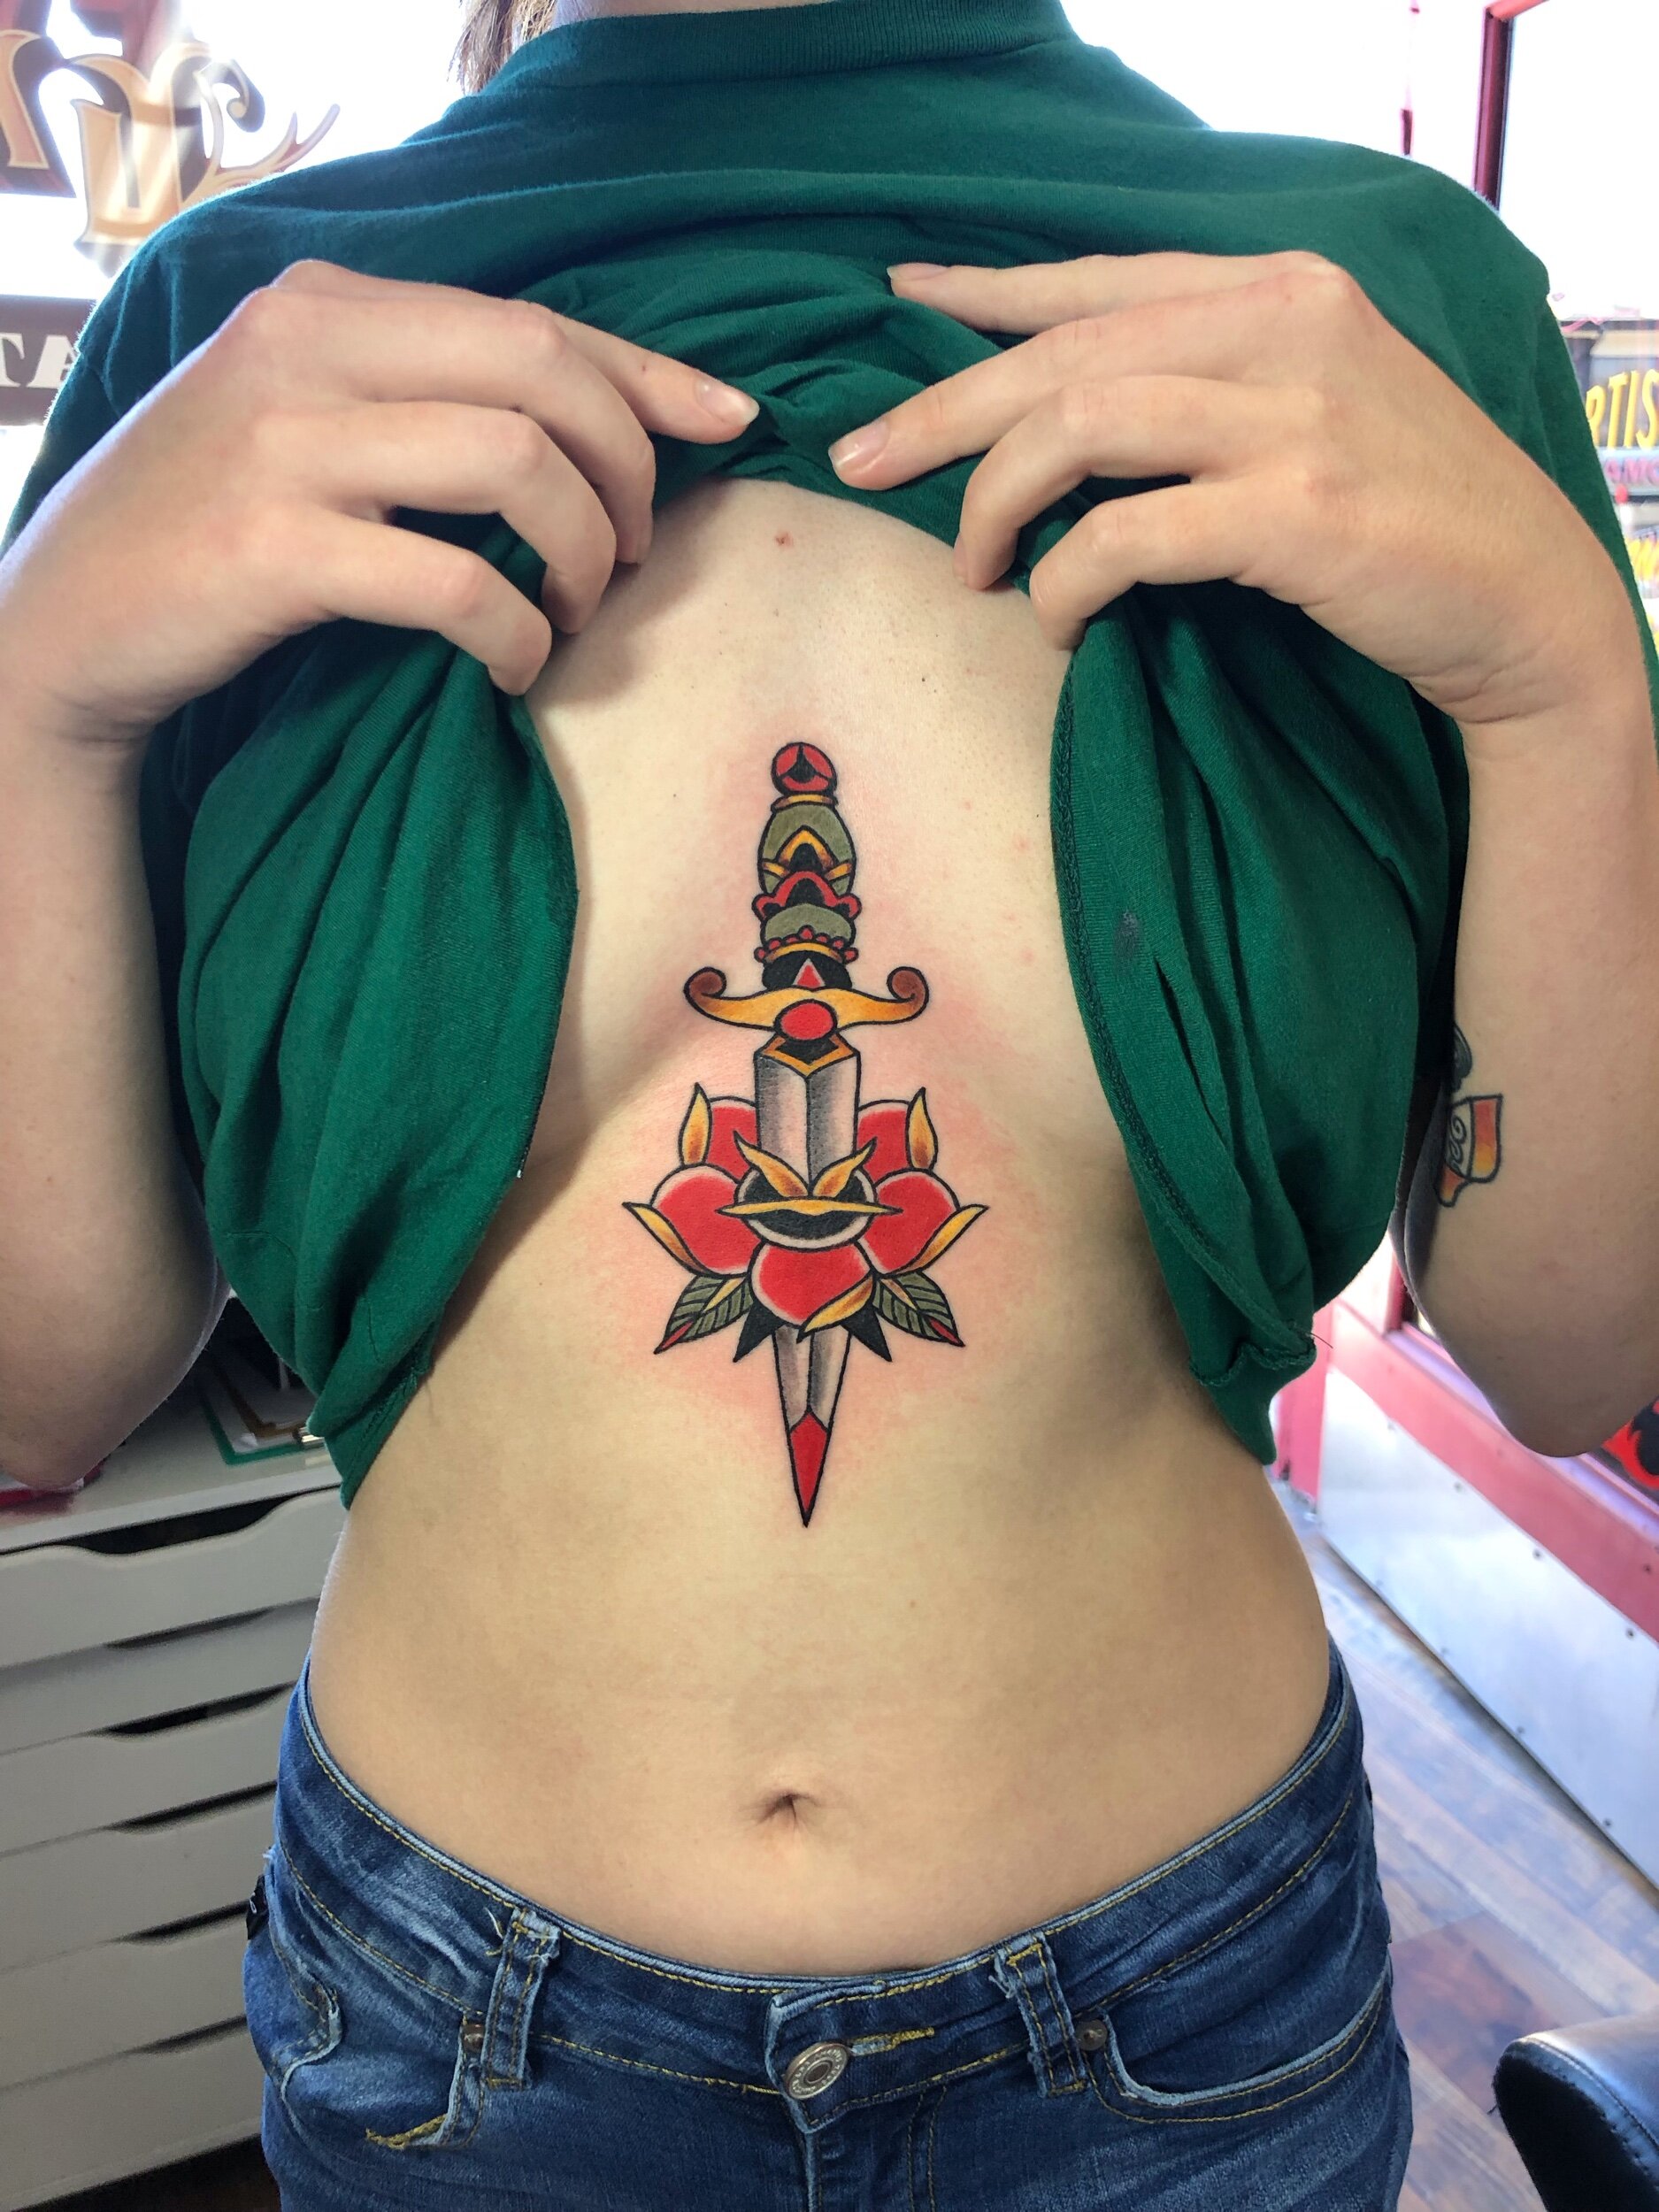 55 Appealing Sternum Tattoo Ideas And Designs To Create Magic  Psycho Tats